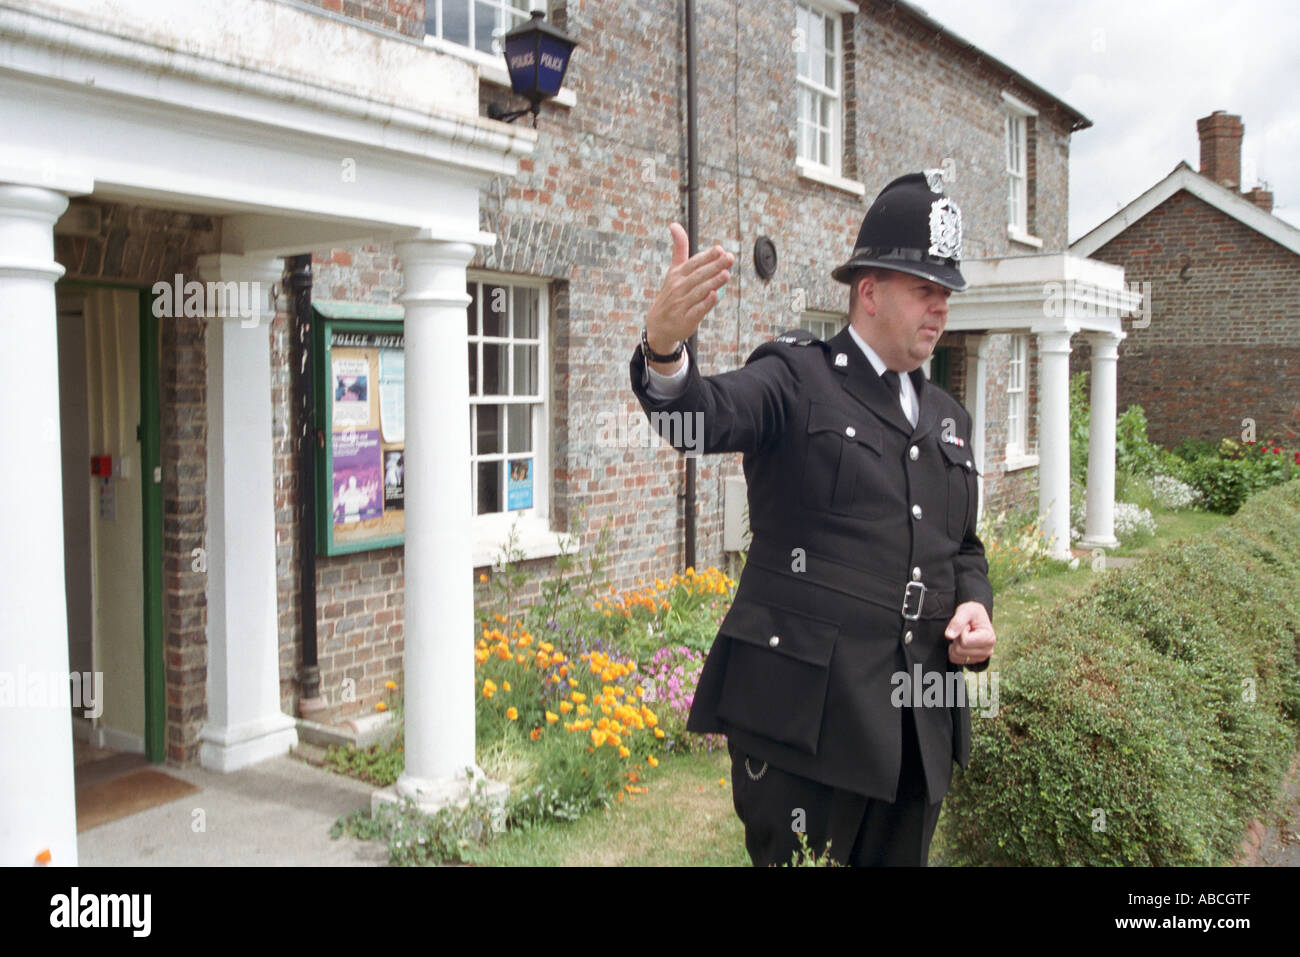 Andy Reid giving directions He is the local traditional rural police bobby stationed in Kingsclere Hampshire UK Stock Photo